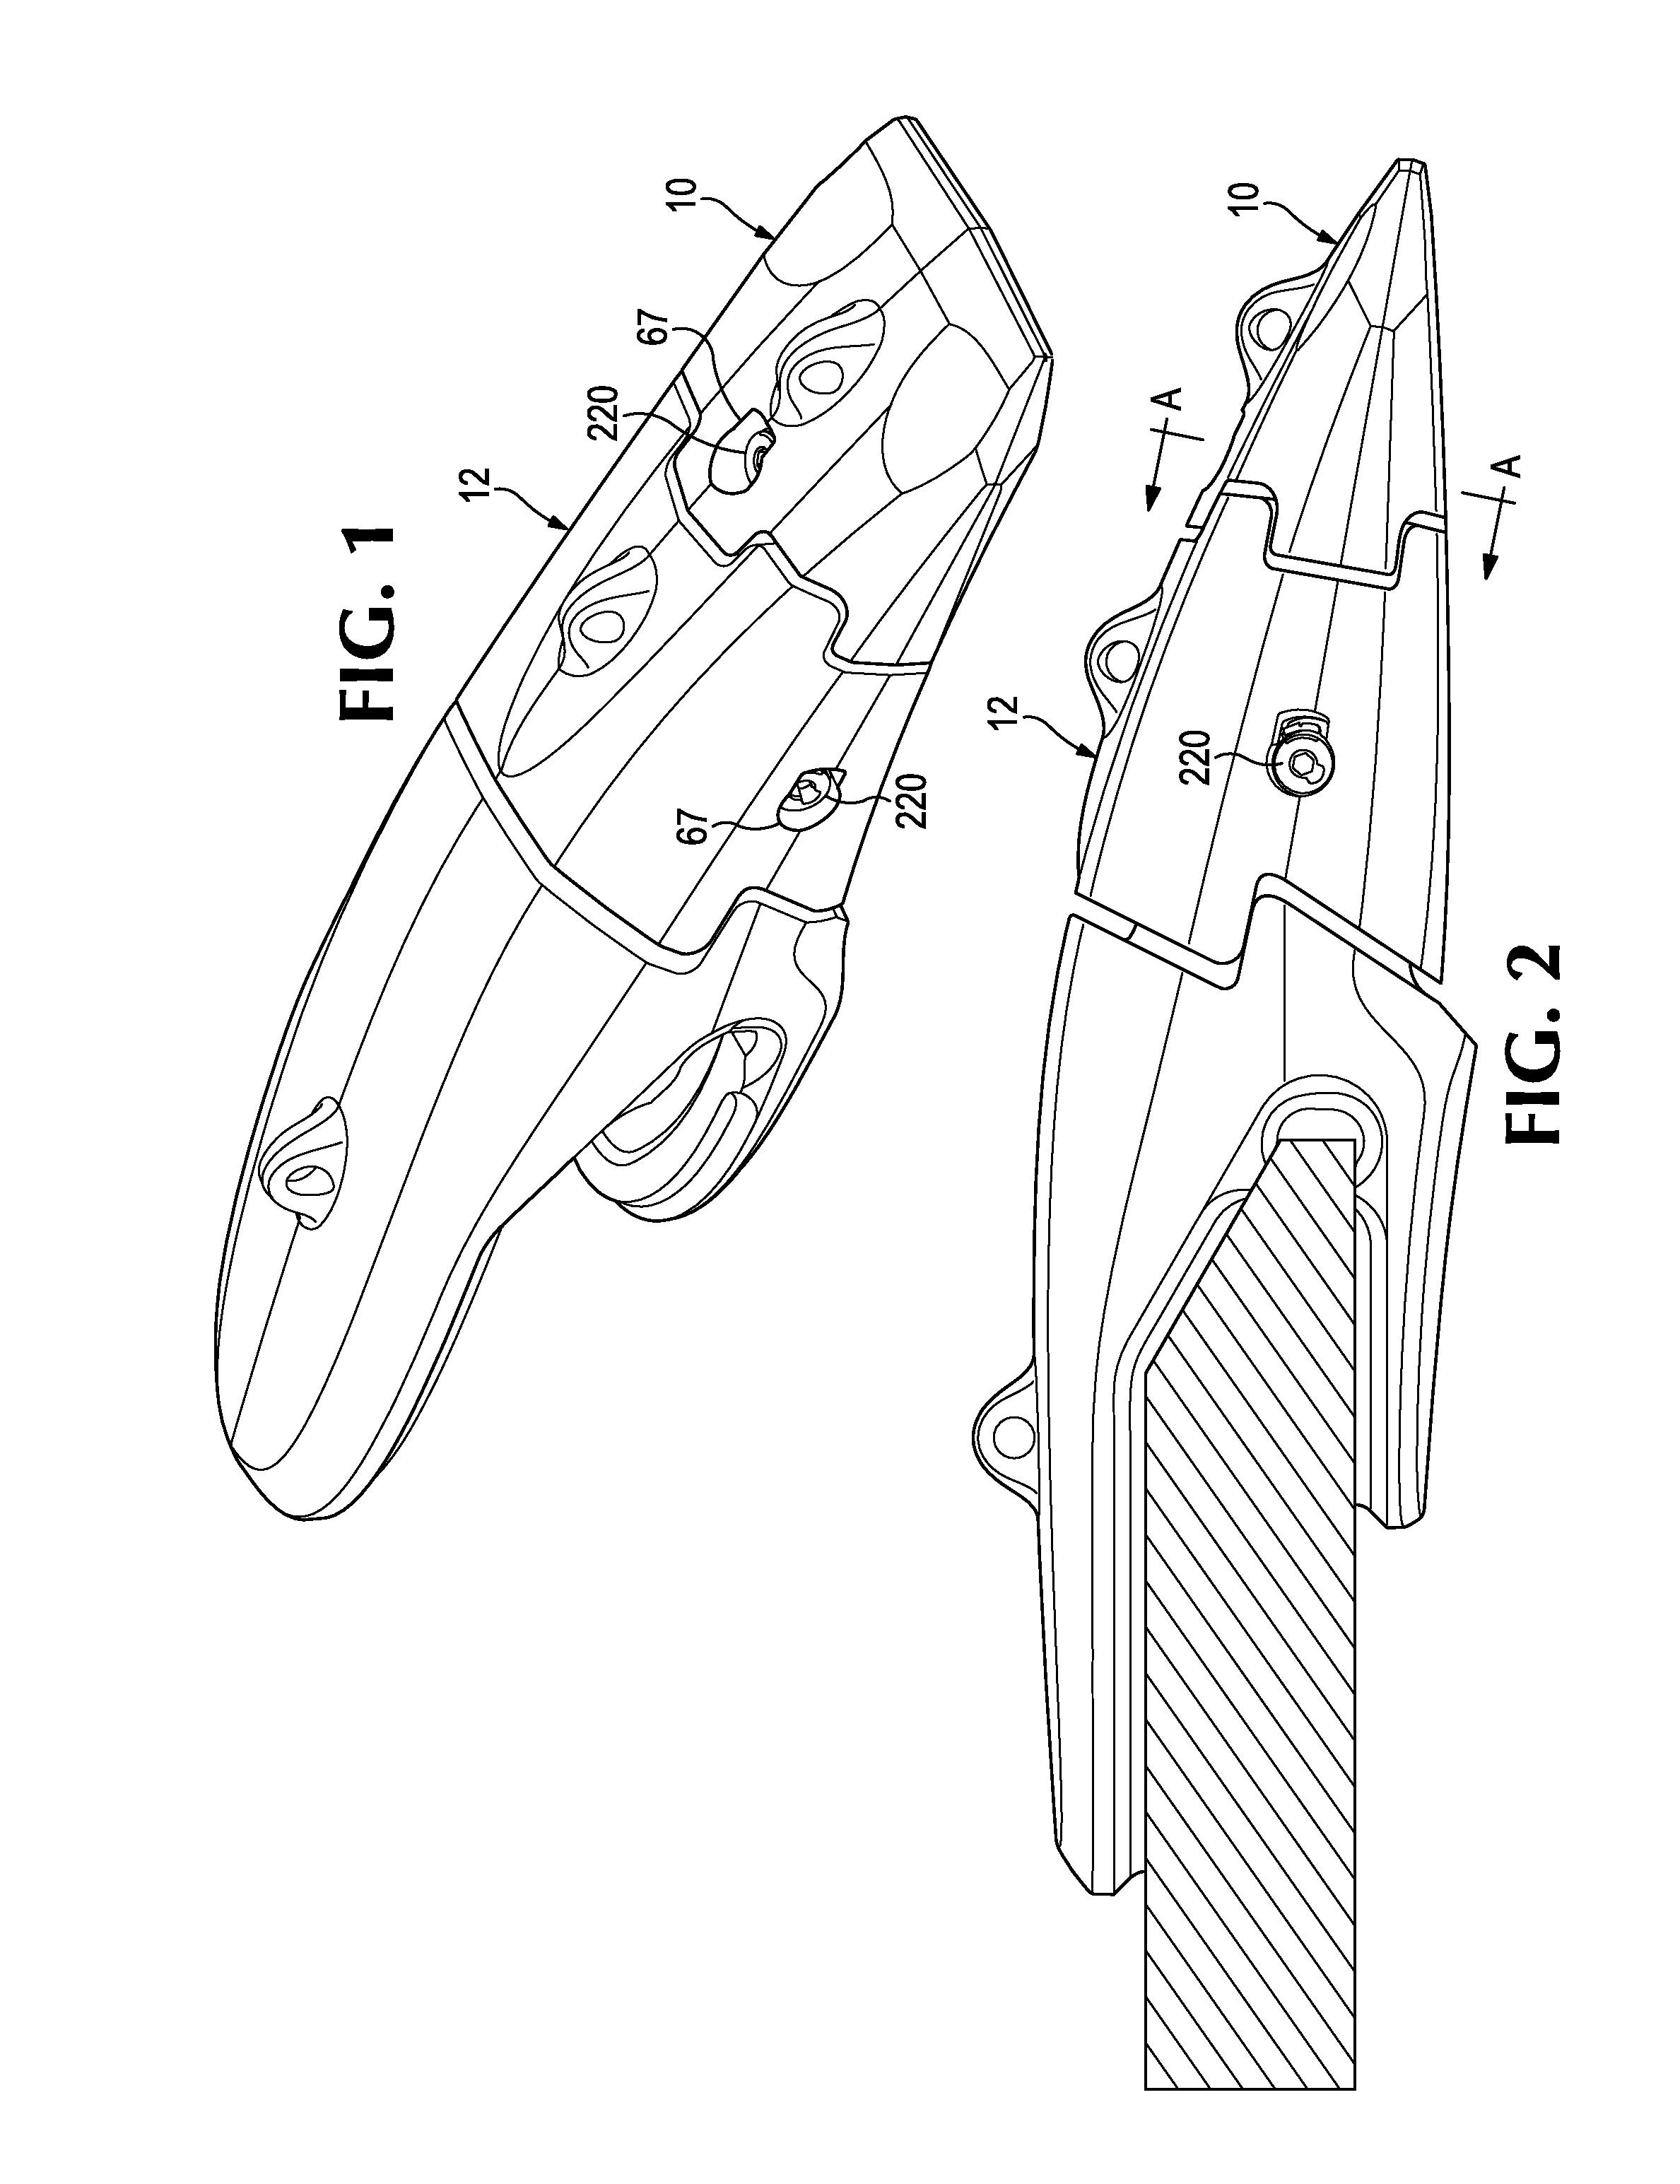 Connector To Facilitate Lifting Of Wear Parts